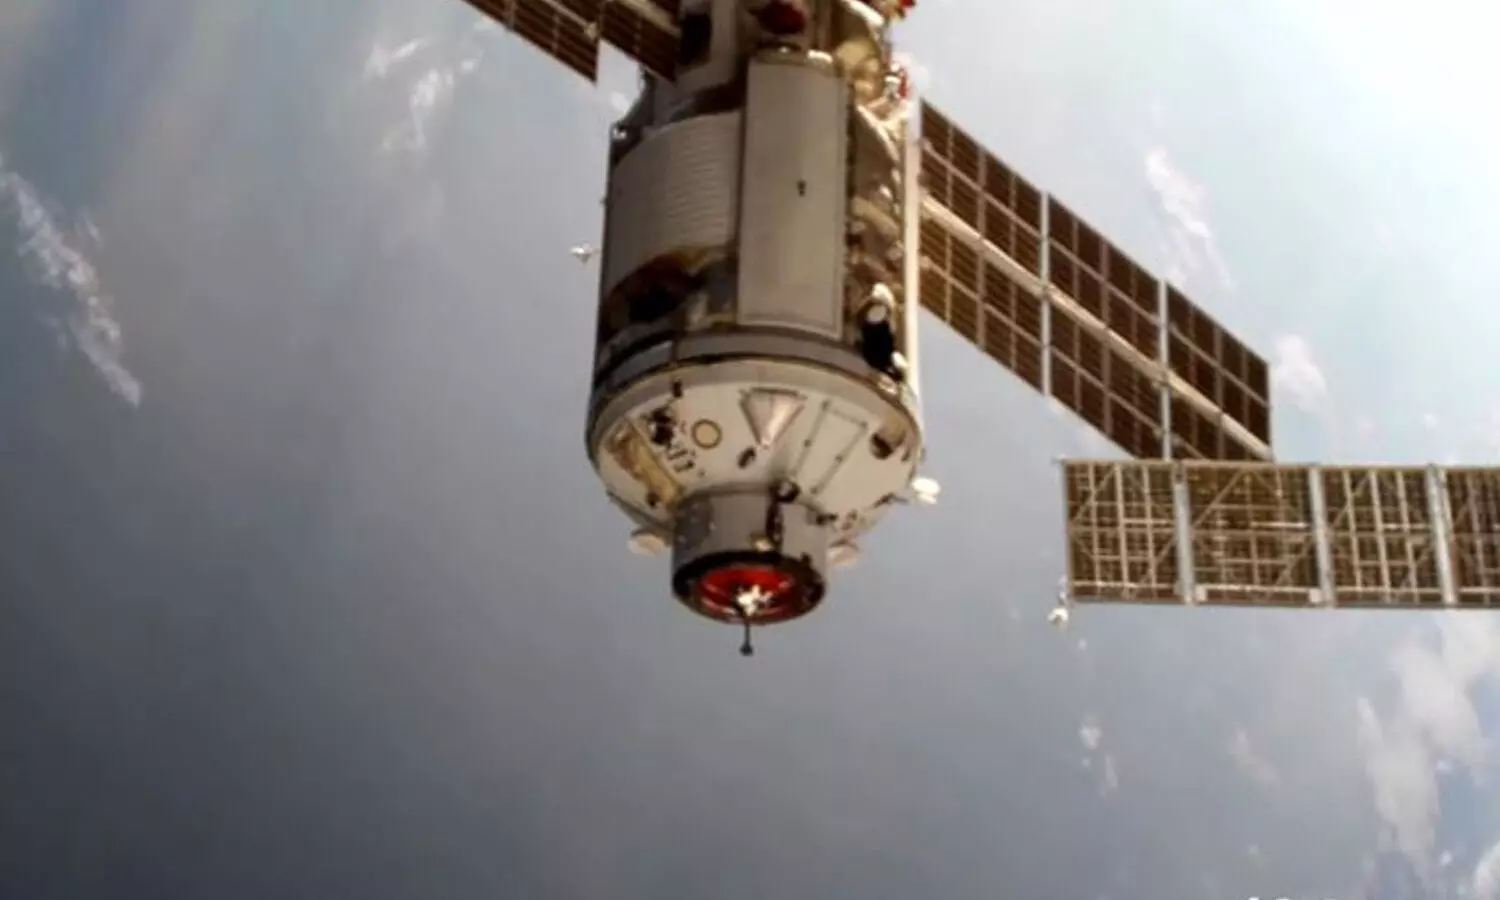 NASA says ISS thrown out of control by misfire of Russian module